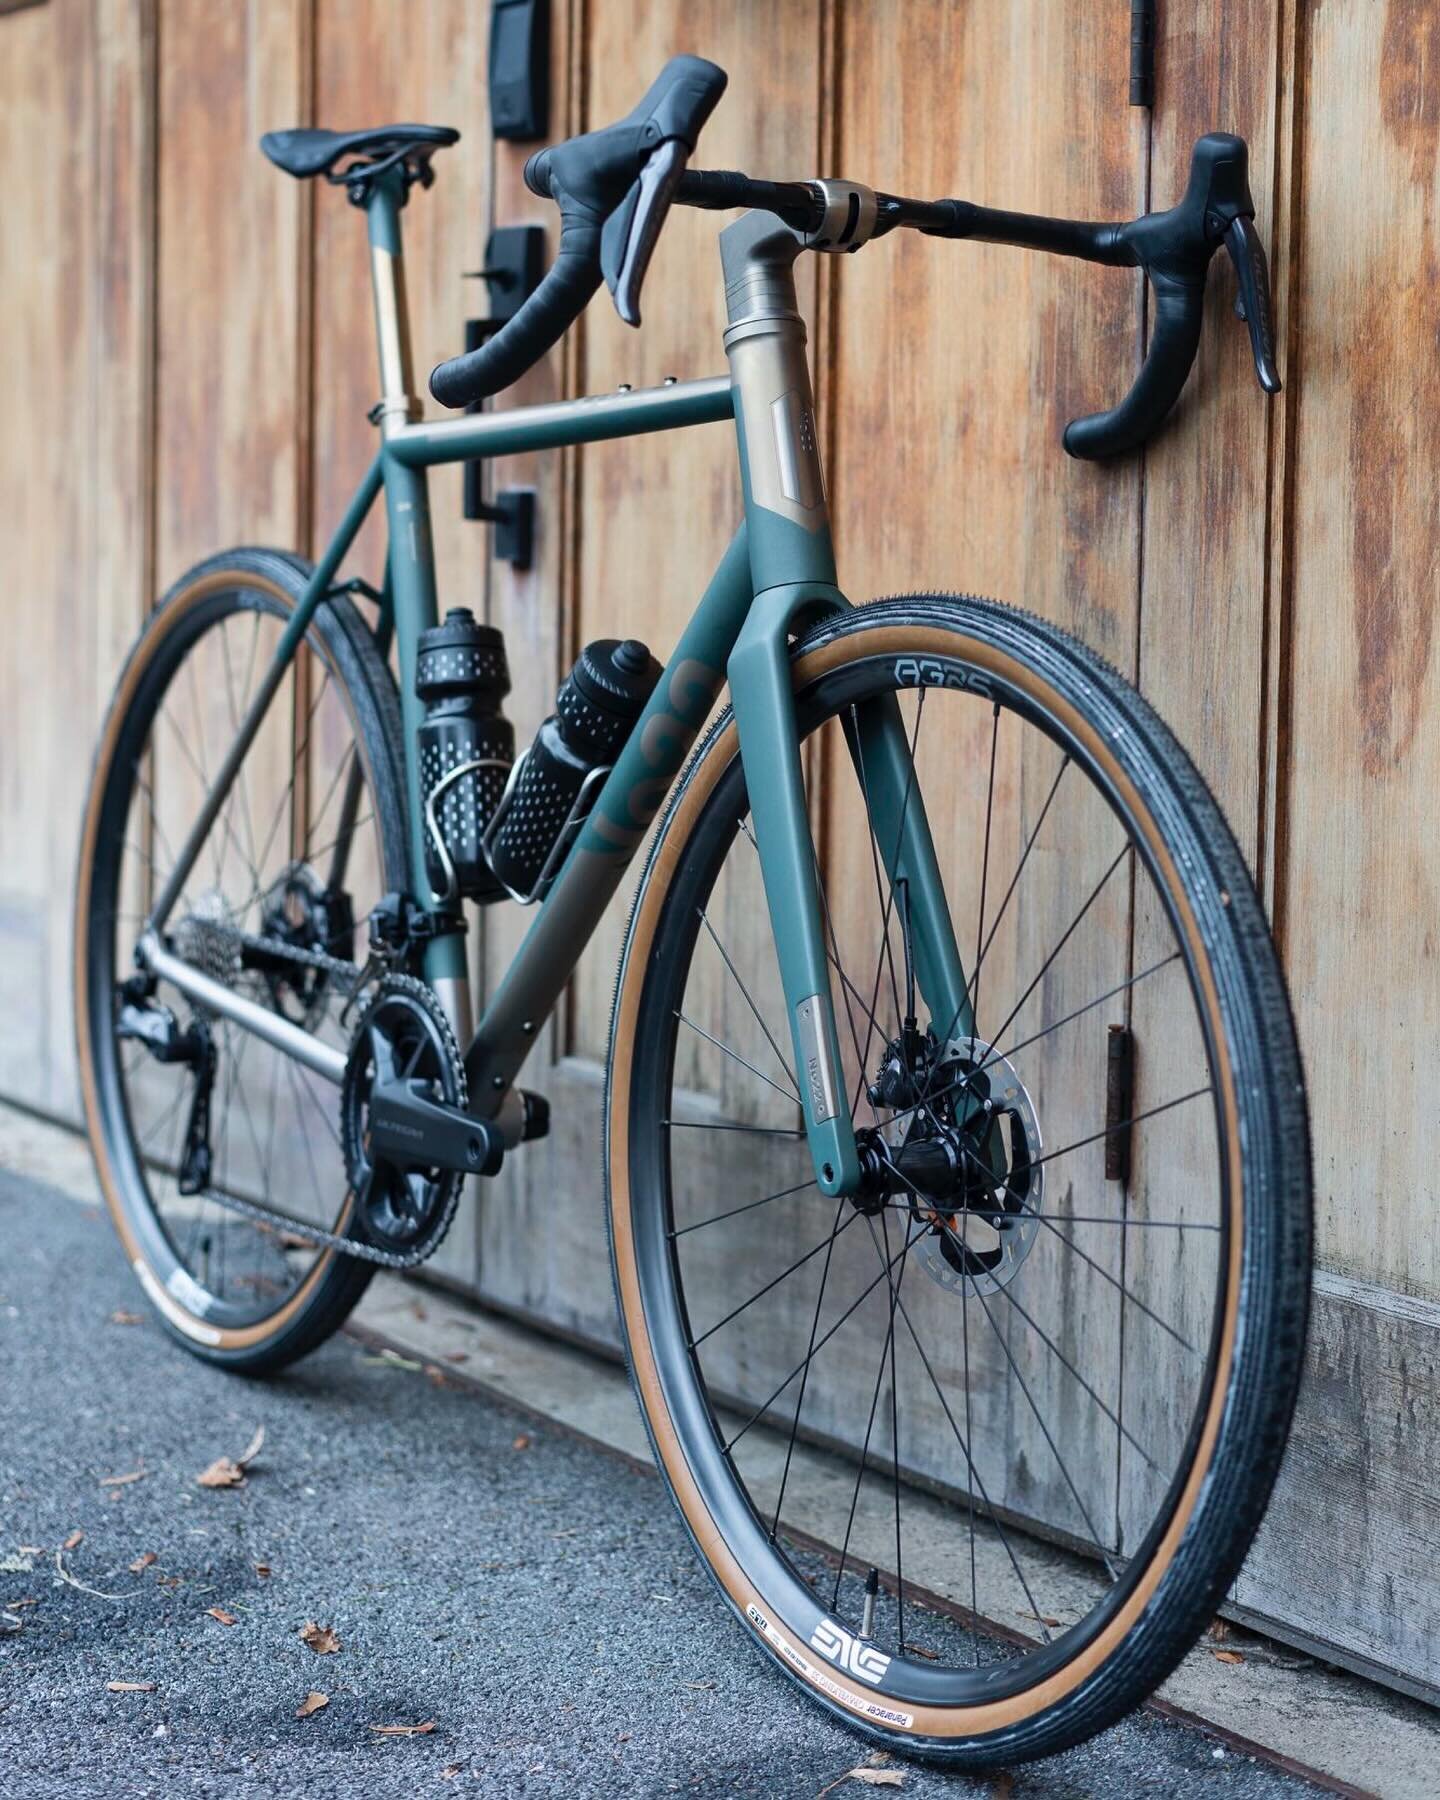 Meet our No. 22 Drifter &ndash; a bespoke gravel warrior in Charcoal Green Cerakote and Anodized Brass. Shimano Ultegra Di2 components, Enve AG25 wheels, and Panaracer tires &ndash; a ride that&rsquo;s as stylish as it is adventurous. Questions? Reac